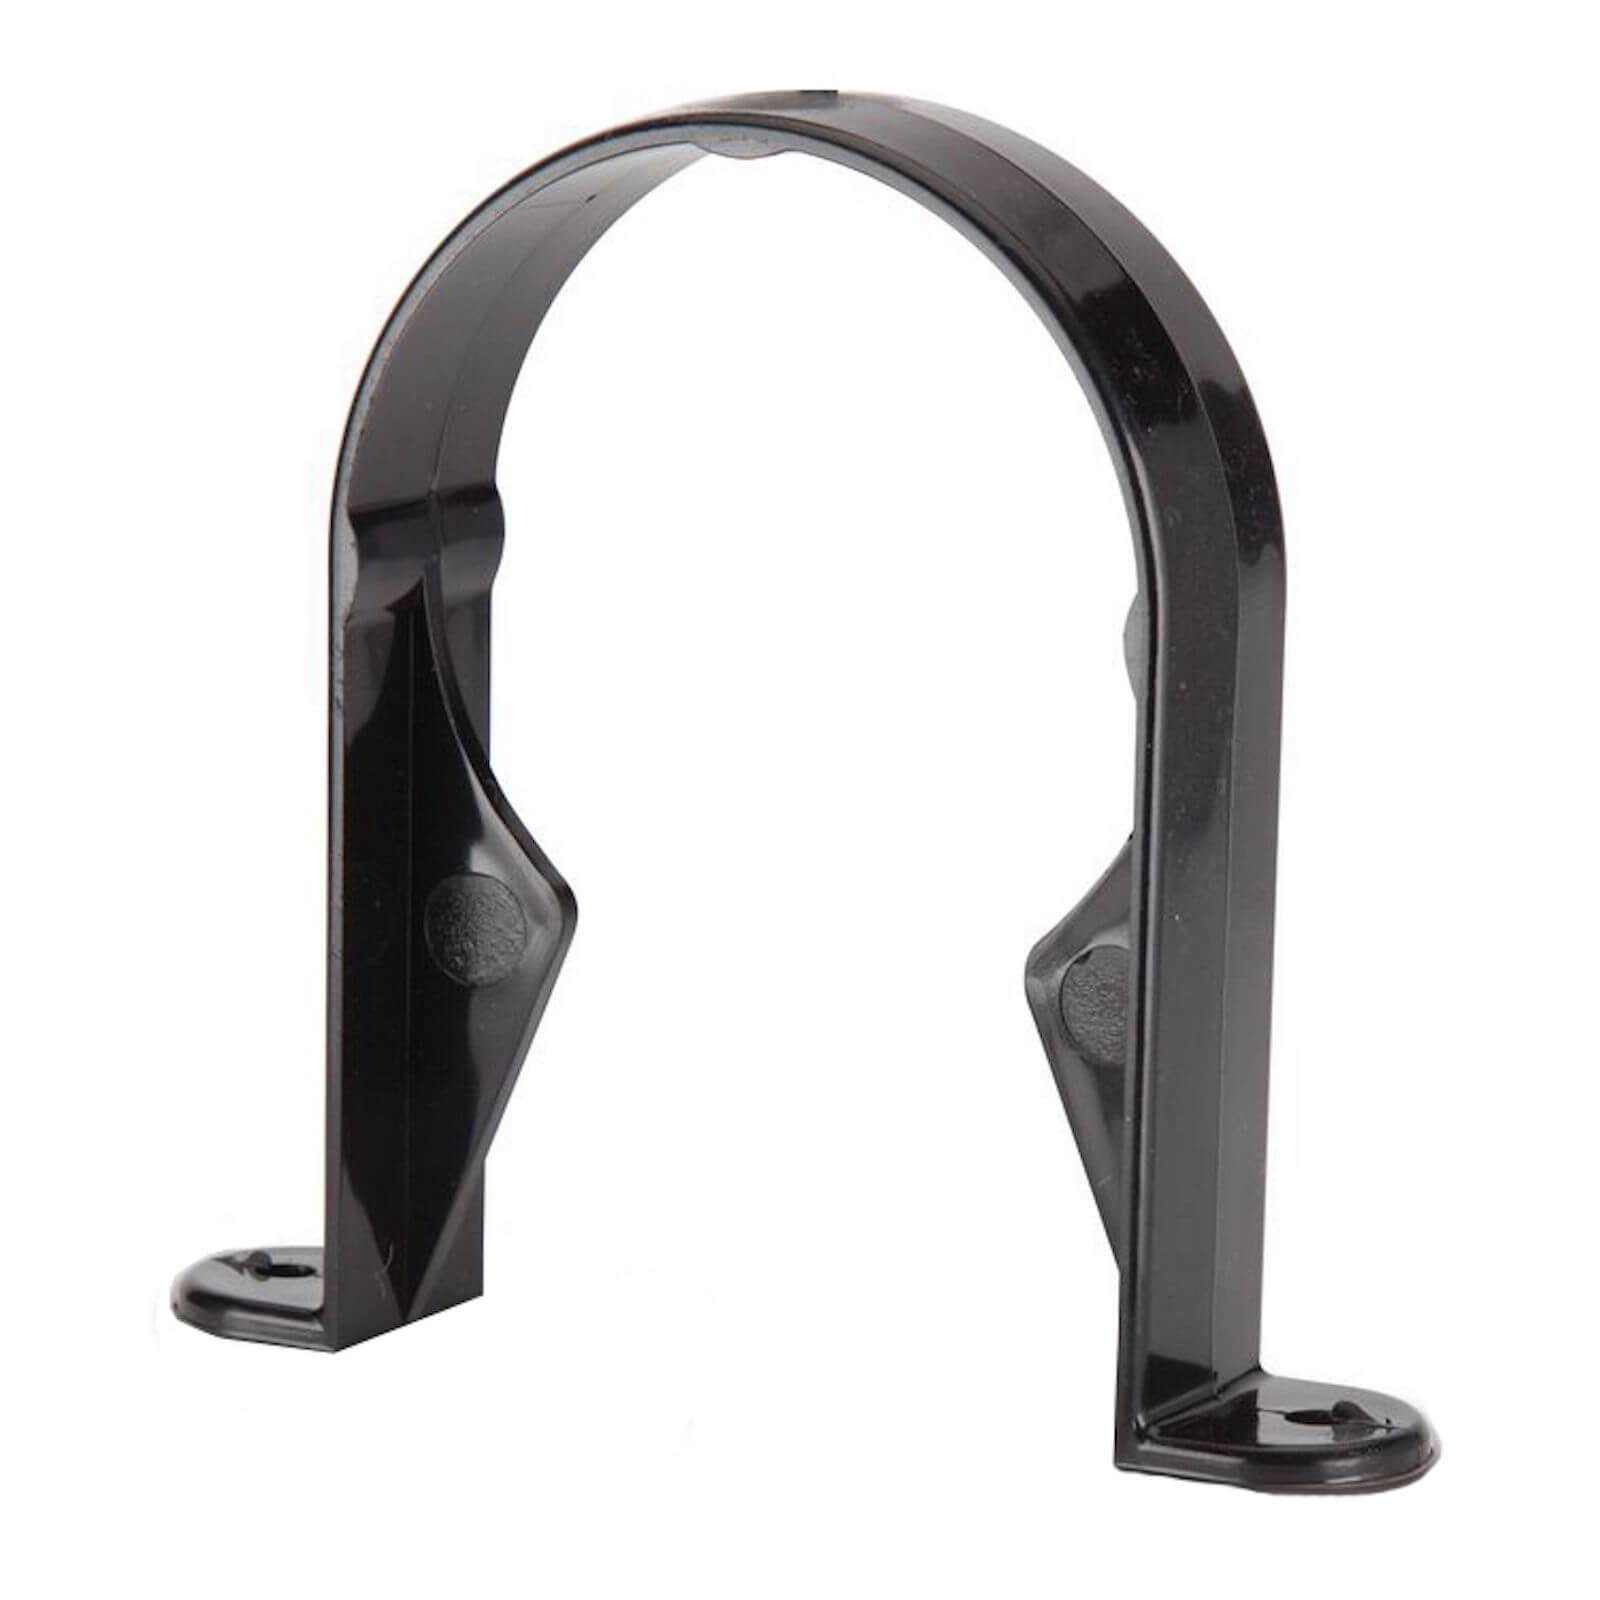 Photo of Polypipe Round Downpipe Bracket - 68mm - Black